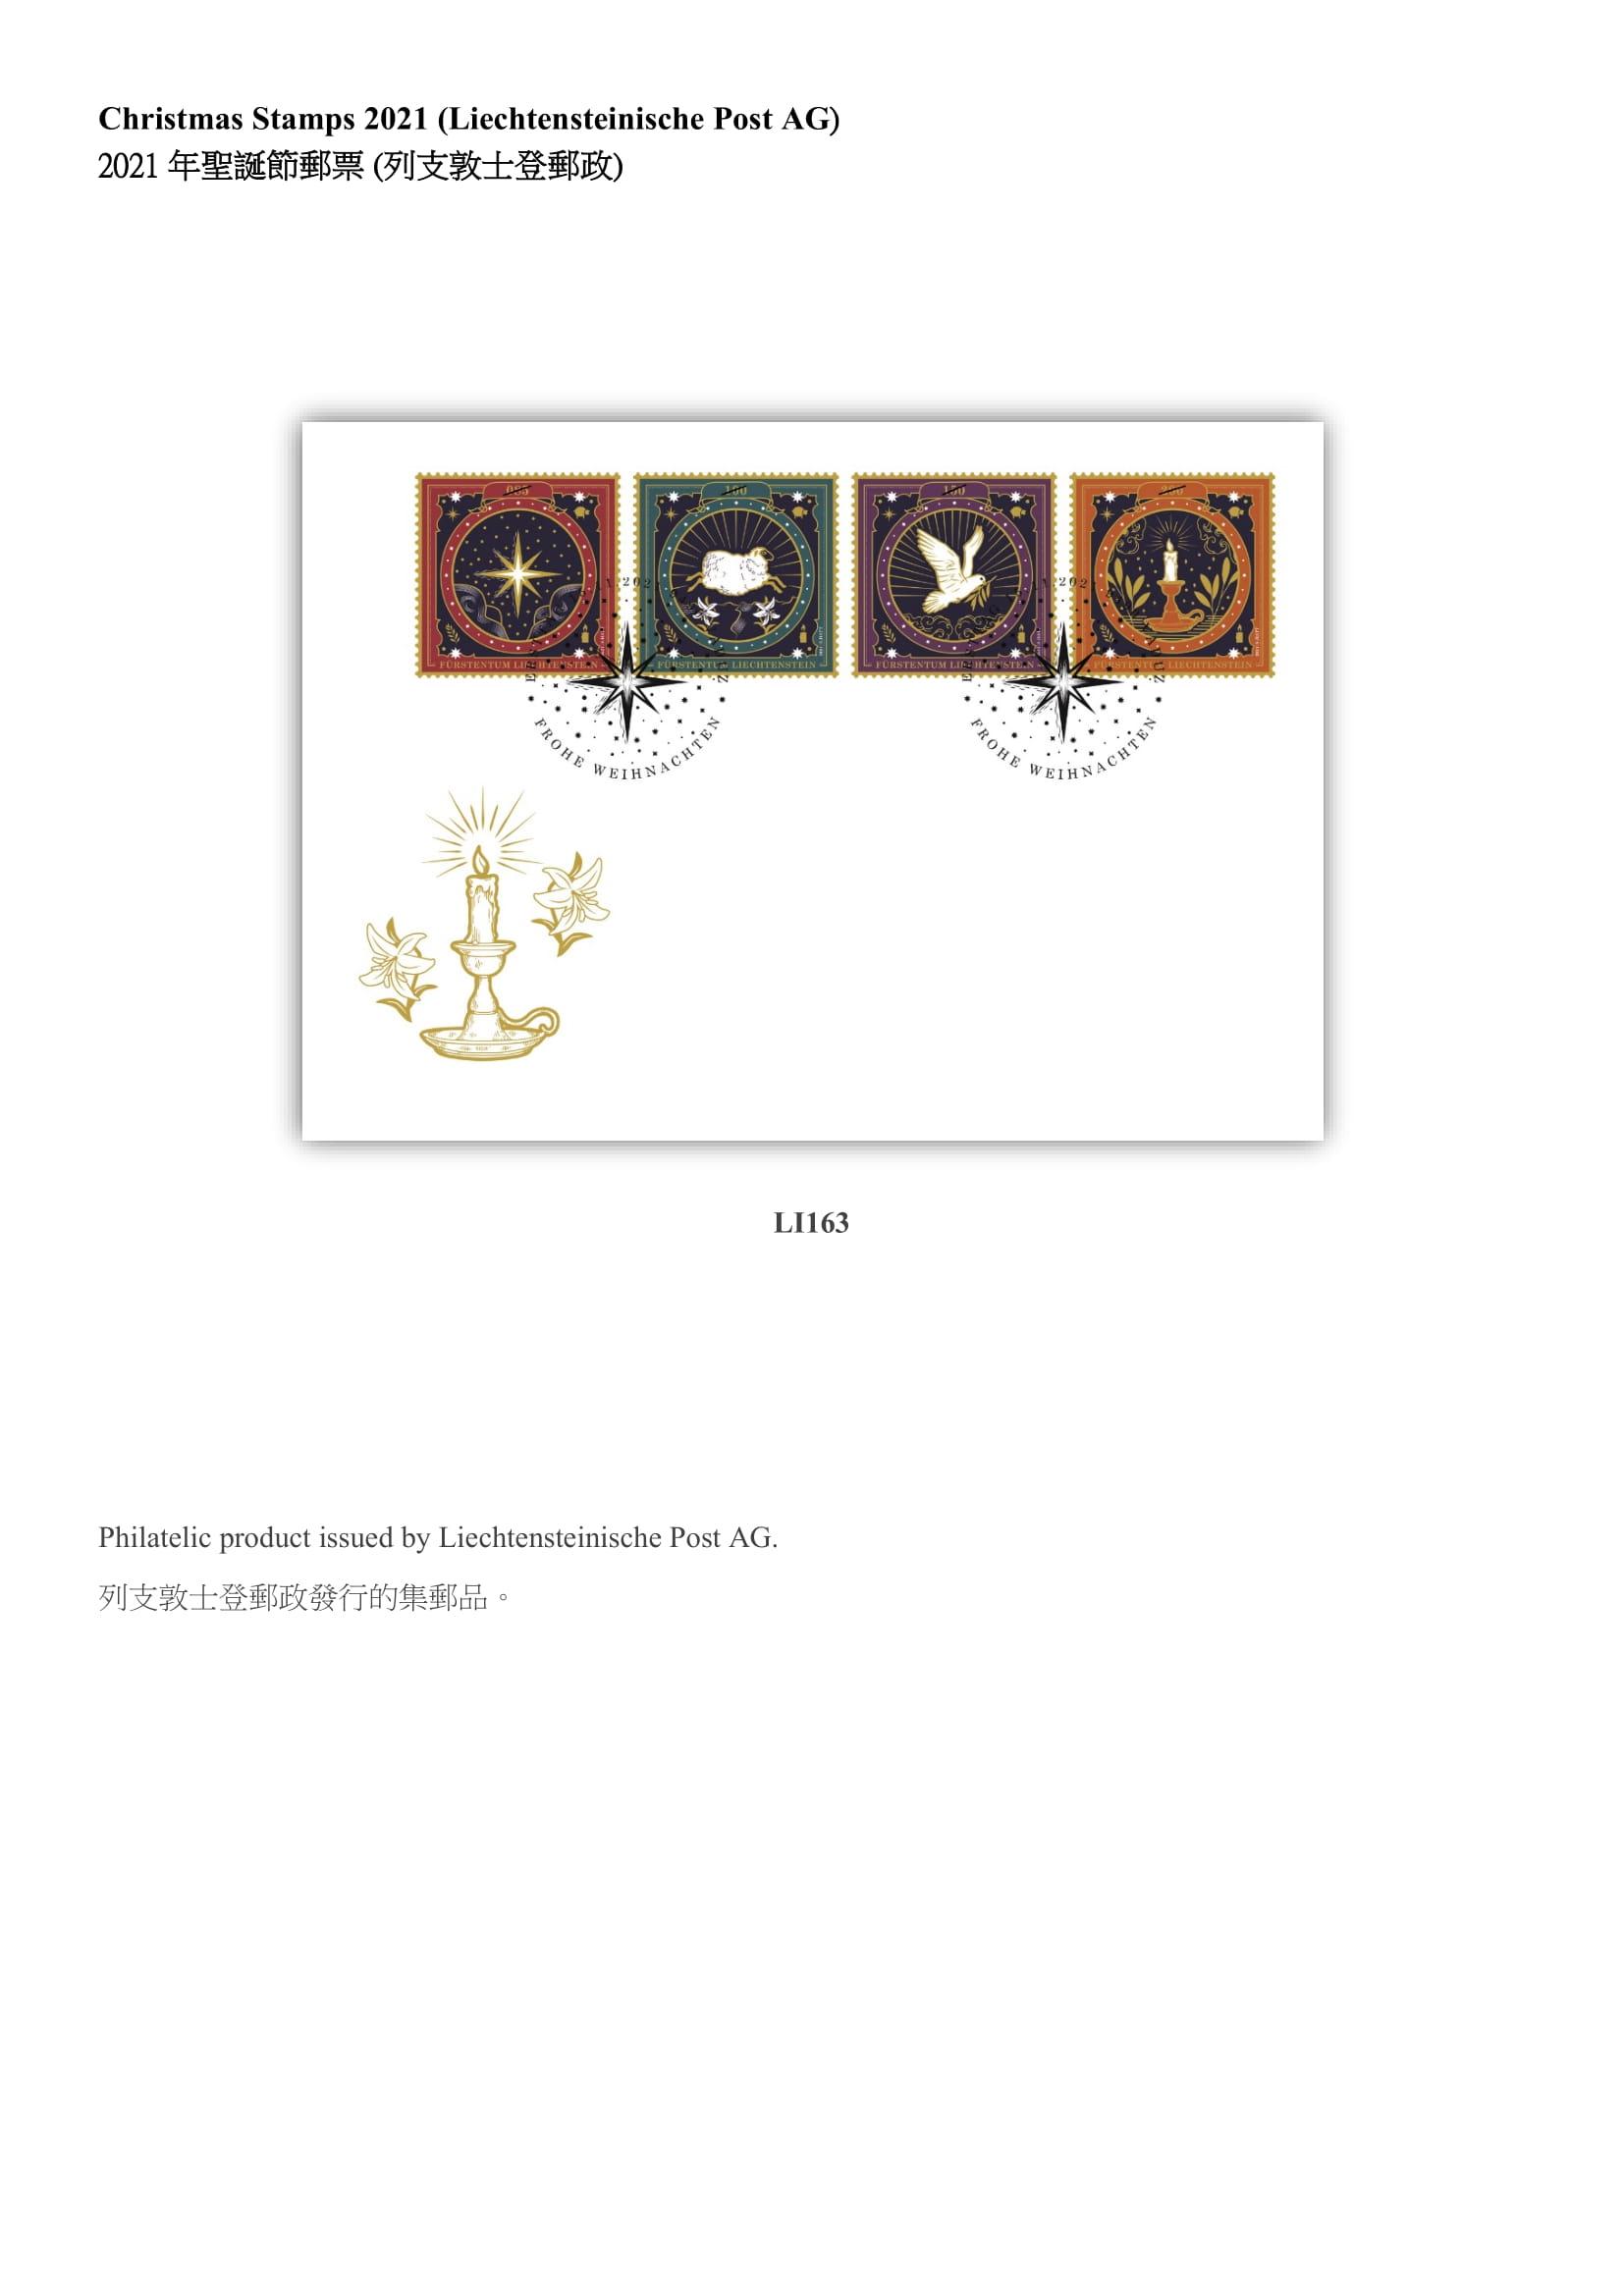 Hongkong Post announced today (December 14) that selected philatelic products issued by Macao and overseas postal administrations, including Australia, Canada, Japan, Liechtenstein and New Zealand, will be put on sale at the Hongkong Post online shopping mall ShopThruPost starting from 8am on December 16. Picture shows a philatelic product issued by Liechtensteinische Post AG.

